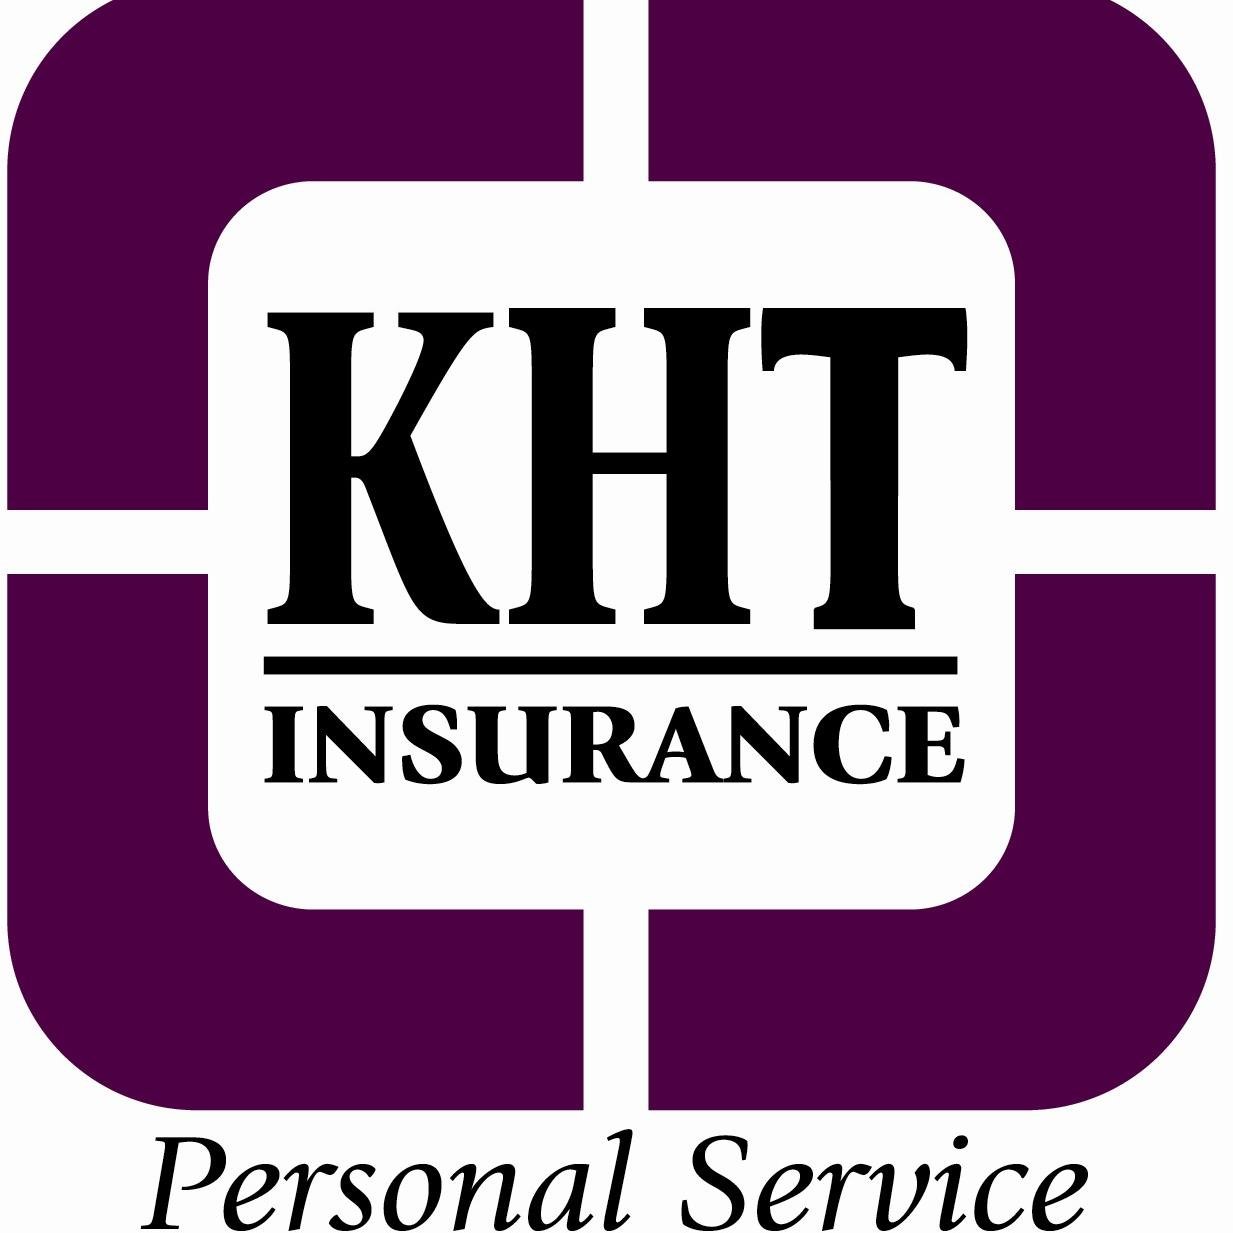 Insurance solutions for eldercare providers. Home Health, Hospice, Residential & Commercial Assisted Living, Nursing Homes, DME, Non Emergency Transport & more!